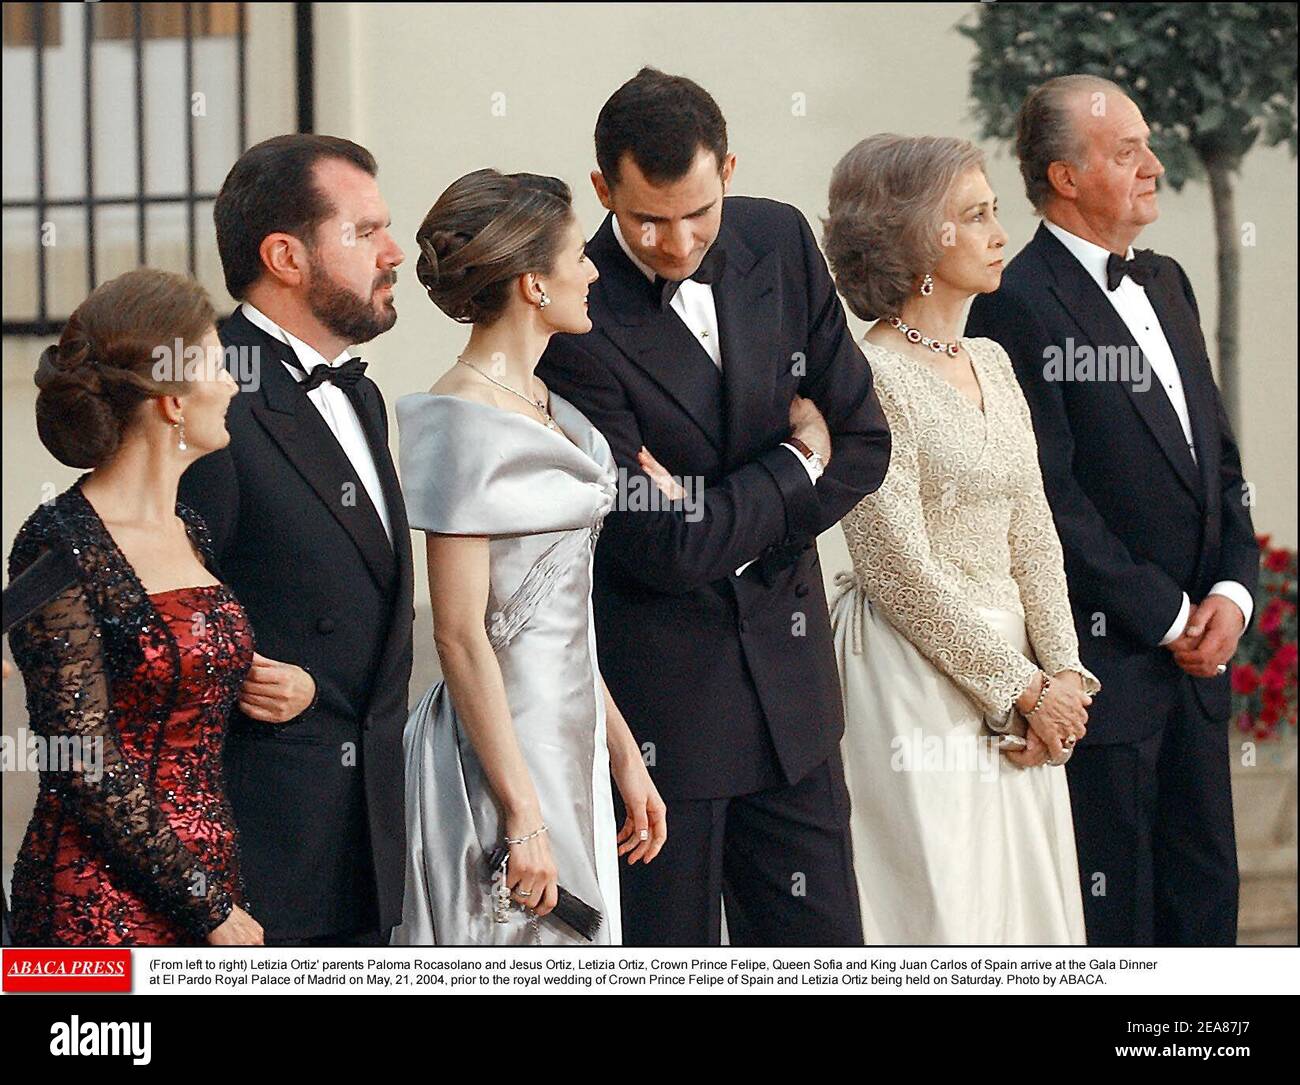 (From left to right) Letizia Ortiz' parents Paloma Rocasolano and Jesus Ortiz, Letizia Ortiz, Crown Prince Felipe, Queen Sofia and King Juan Carlos of Spain arrive at the Gala Dinner at El Pardo Royal Palace of Madrid on May, 21, 2004, prior to the royal wedding of Crown Prince Felipe of Spain and Letizia Ortiz being held on Saturday. Photo by ABACA. Stock Photo